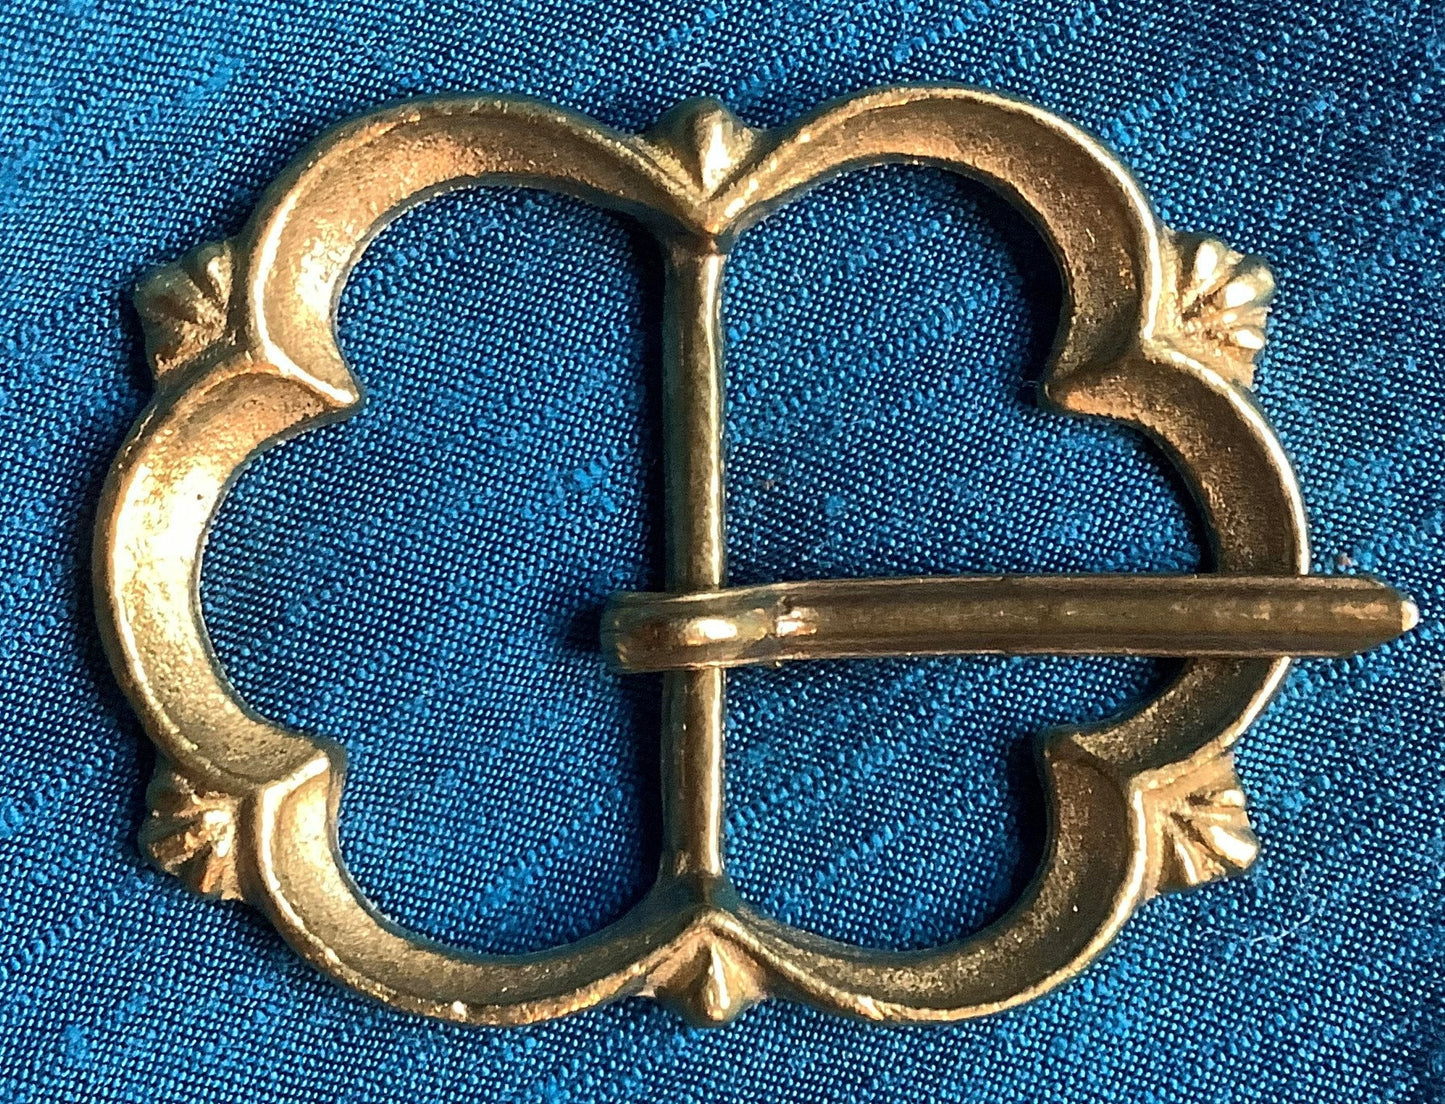 Medieval Spectacle Buckle - Double Tri-lobed Spectacle